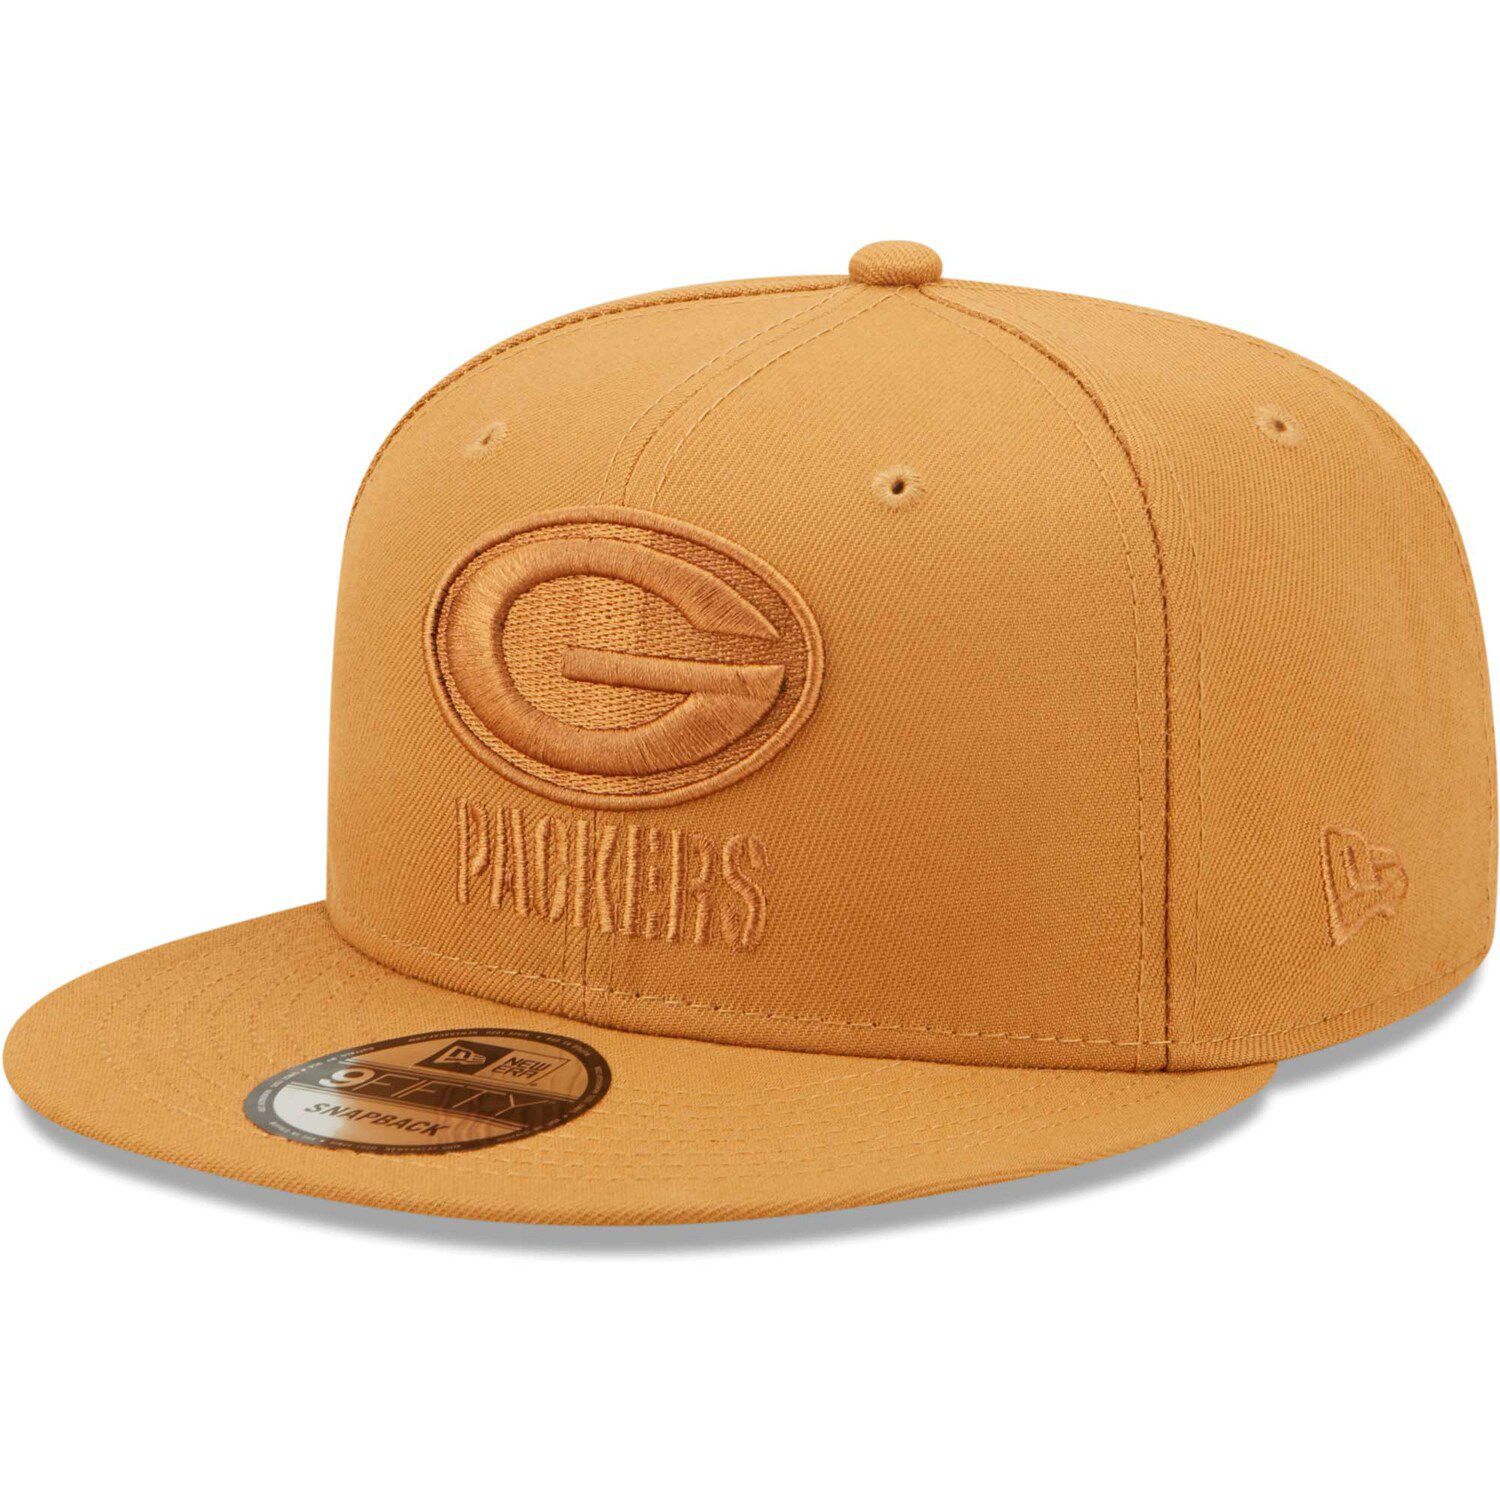 Green Bay Packers New Era Flawless 9FIFTY Snapback Hat - Navy/Gold